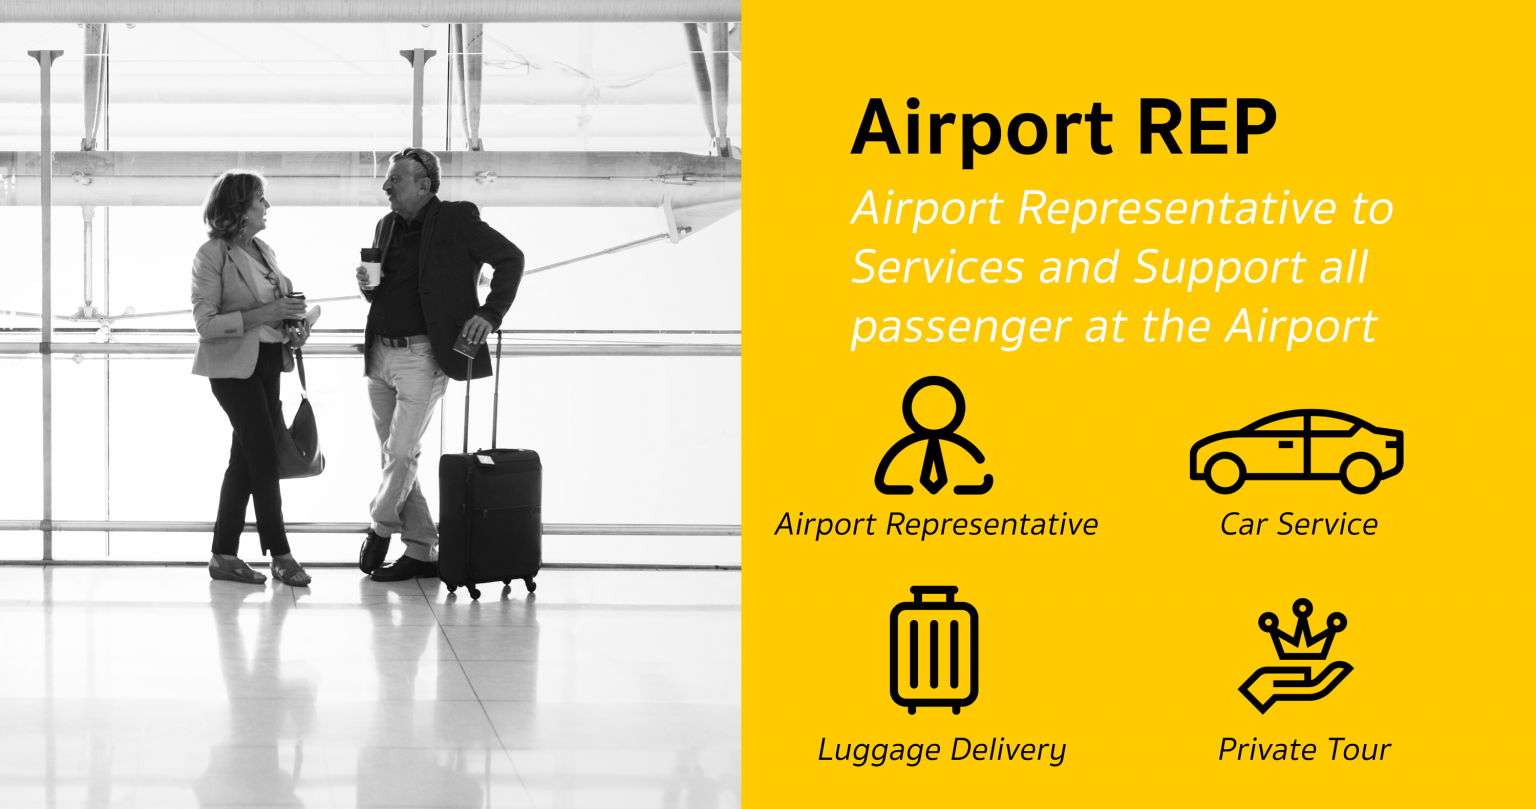 Airport Representative to Services and Support all passenger at the Airport